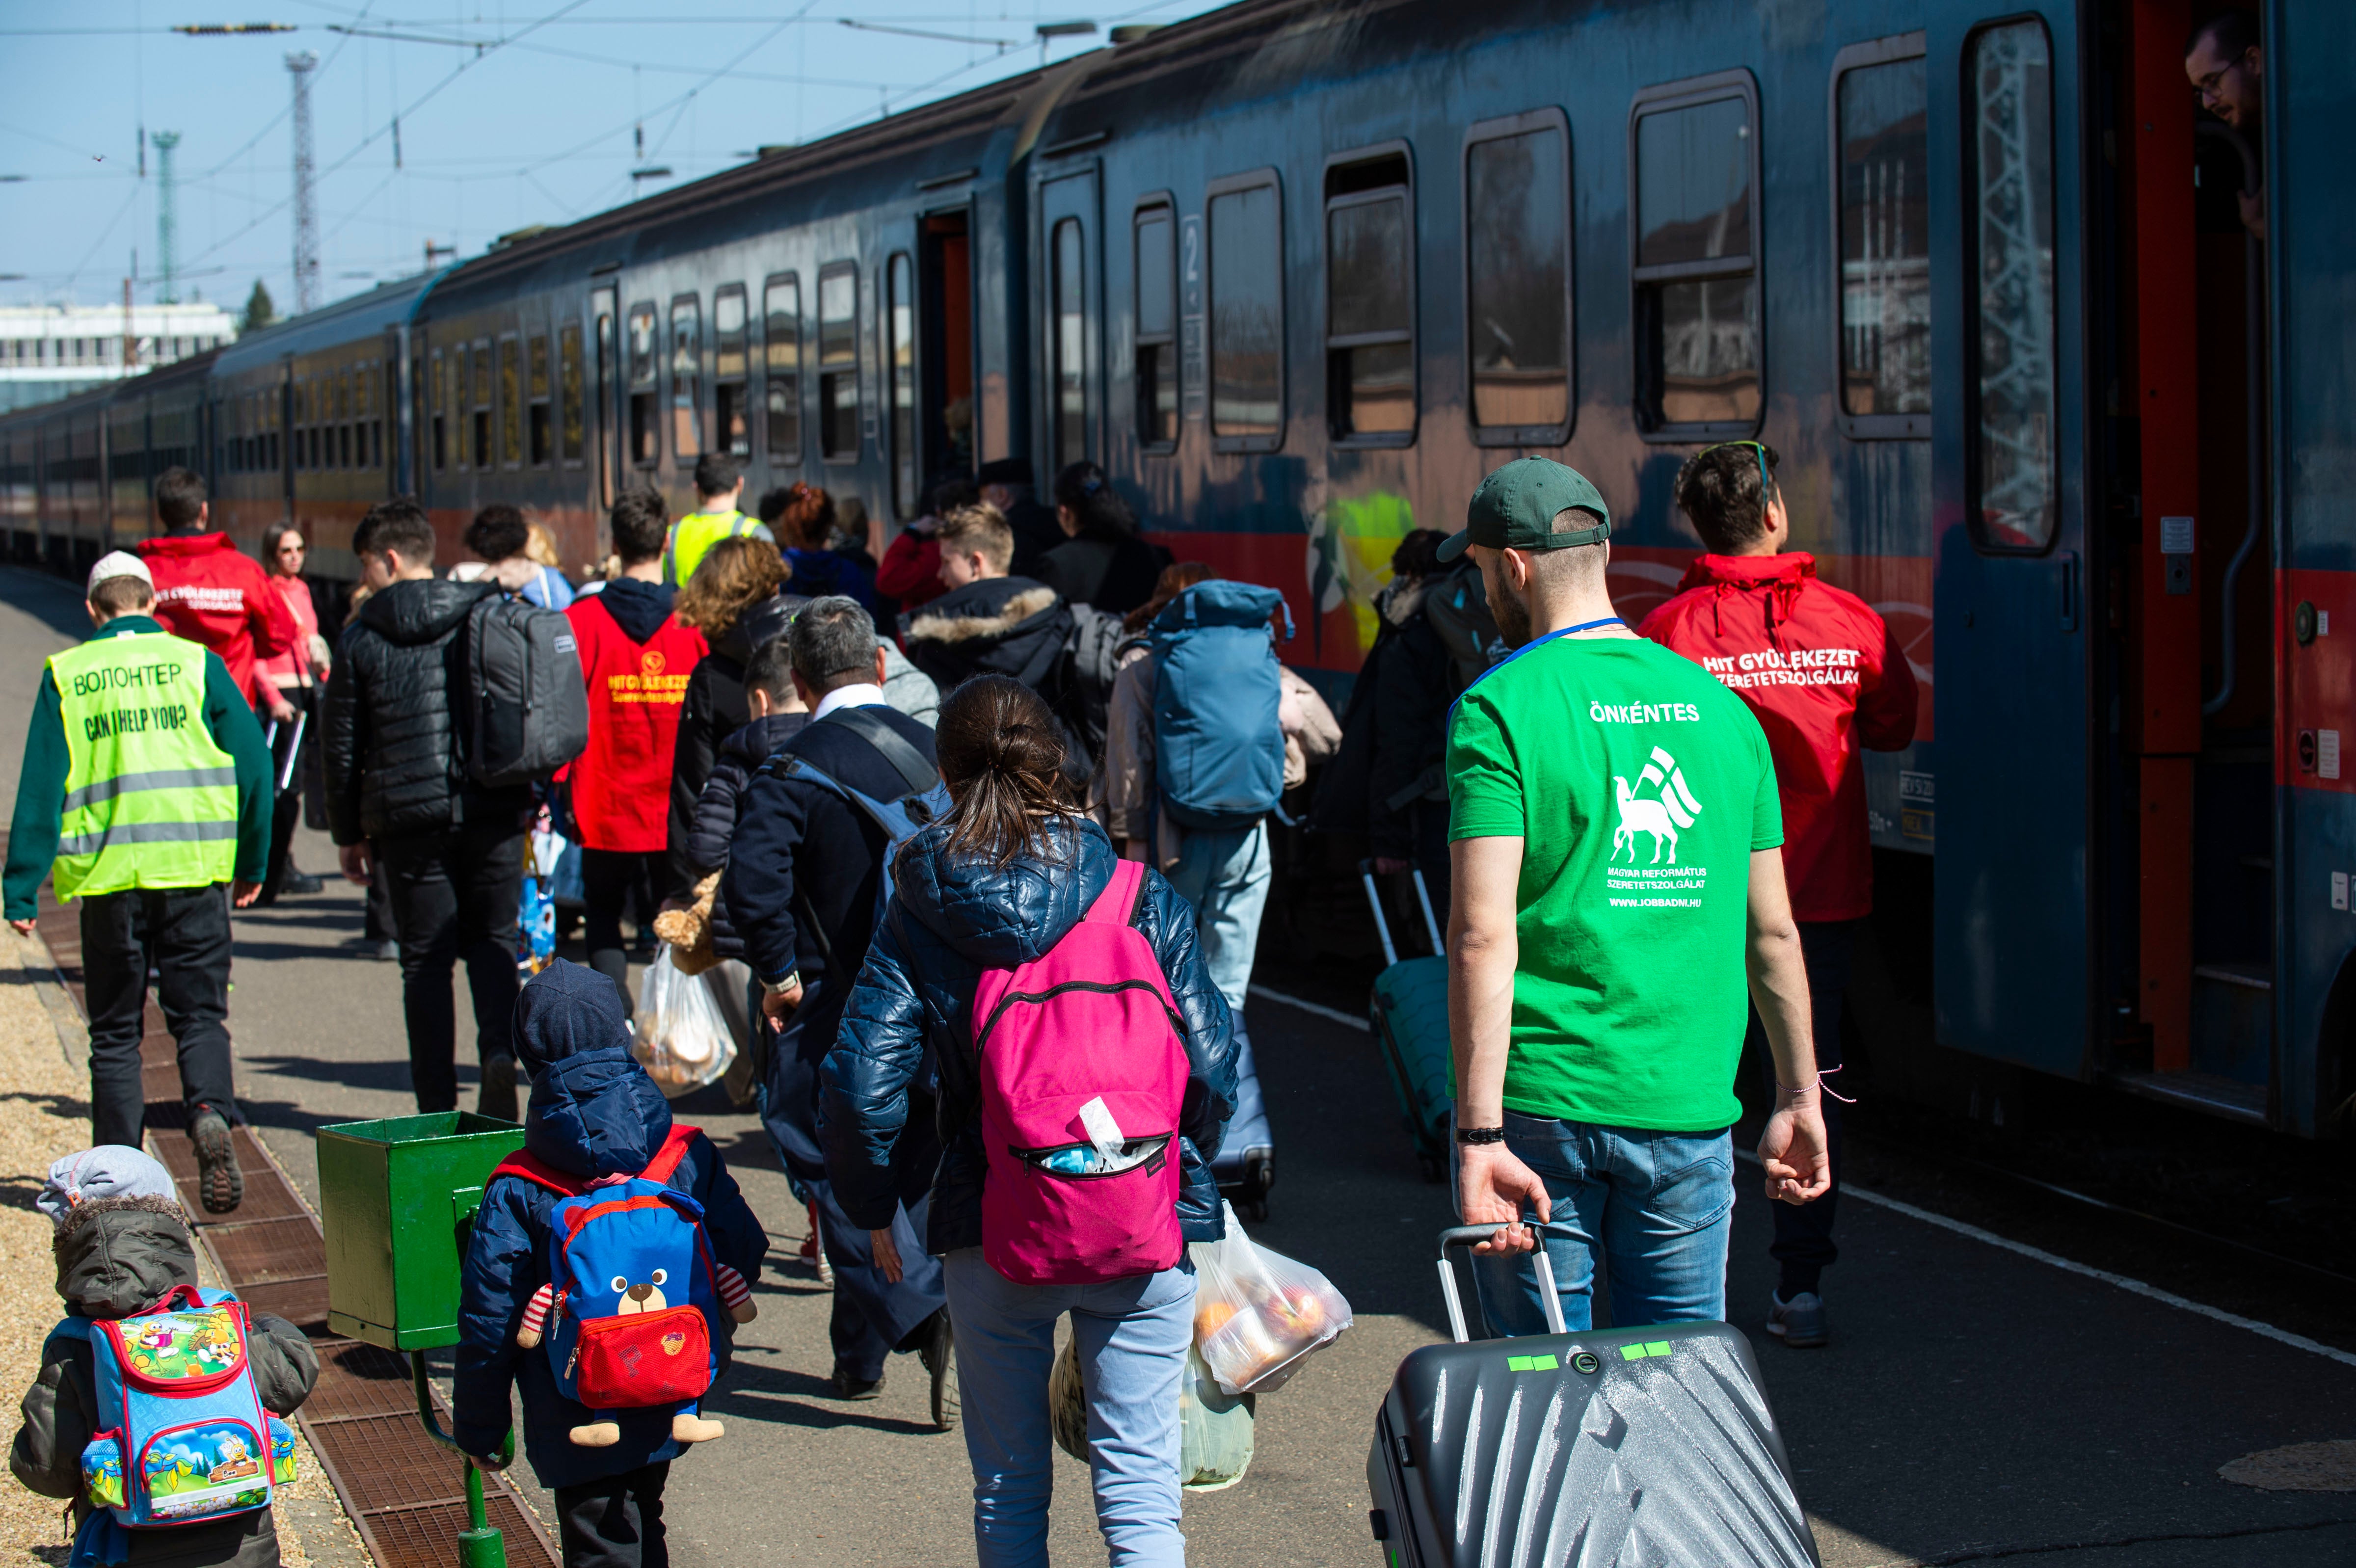 Aid workers from around the world helped the refugees as they disembarked in Hungary